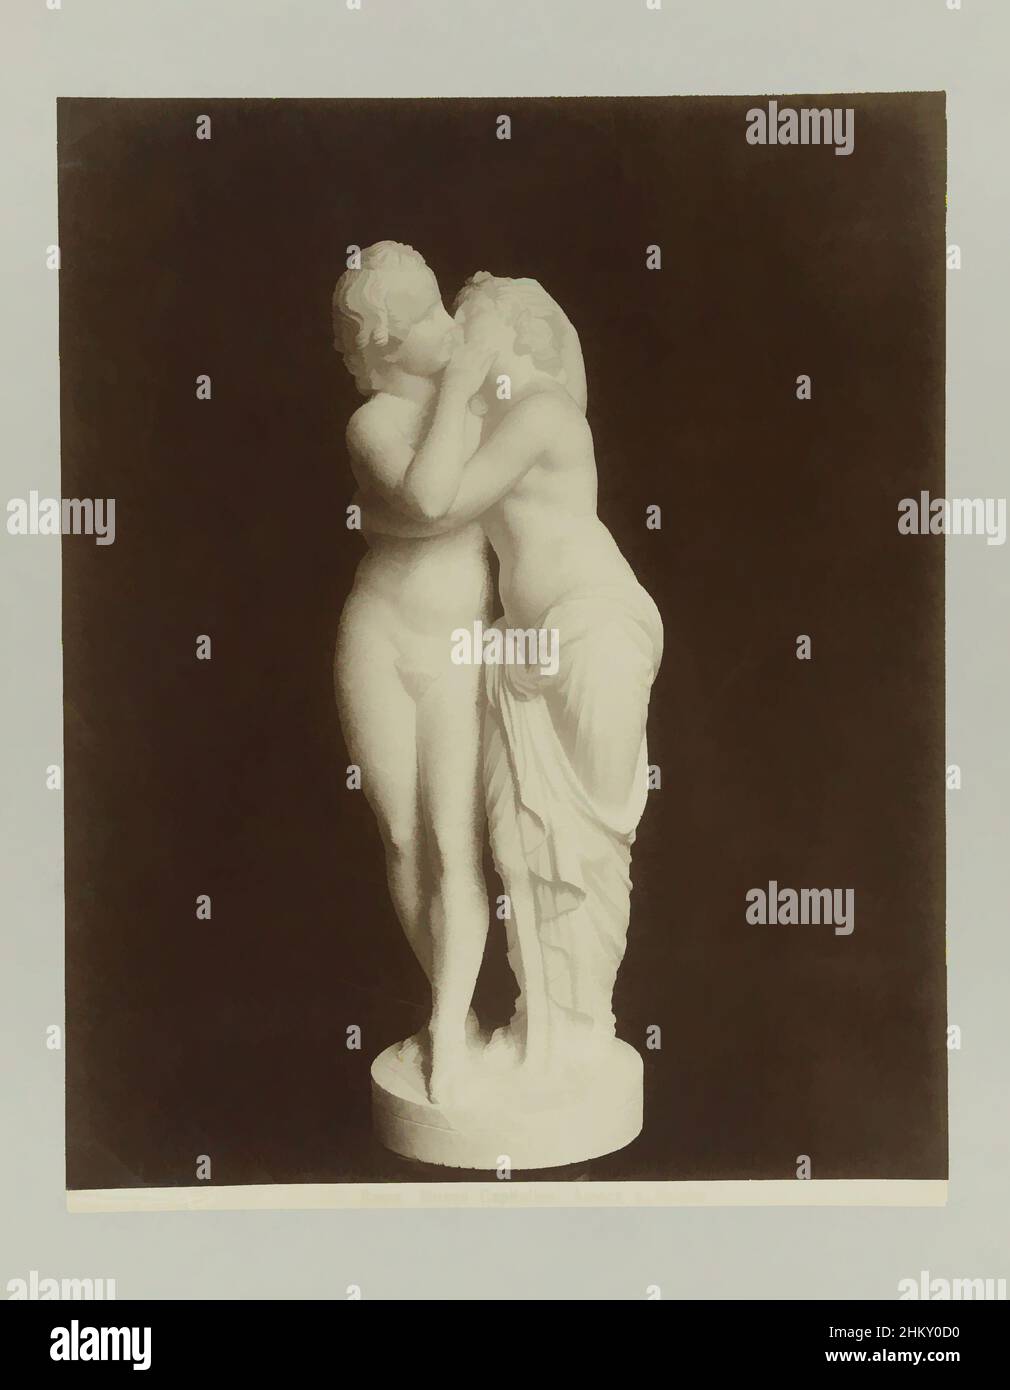 Art inspired by Sculpture of Amor and Psyche, N. 1372 Roma. Museo Capitolino. Amore e Psiche, Rome, c. 1880 - c. 1904, paper, albumen print, height 250 mm × width 198 mmheight 327 mm × width 241 mm, Classic works modernized by Artotop with a splash of modernity. Shapes, color and value, eye-catching visual impact on art. Emotions through freedom of artworks in a contemporary way. A timeless message pursuing a wildly creative new direction. Artists turning to the digital medium and creating the Artotop NFT Stock Photo